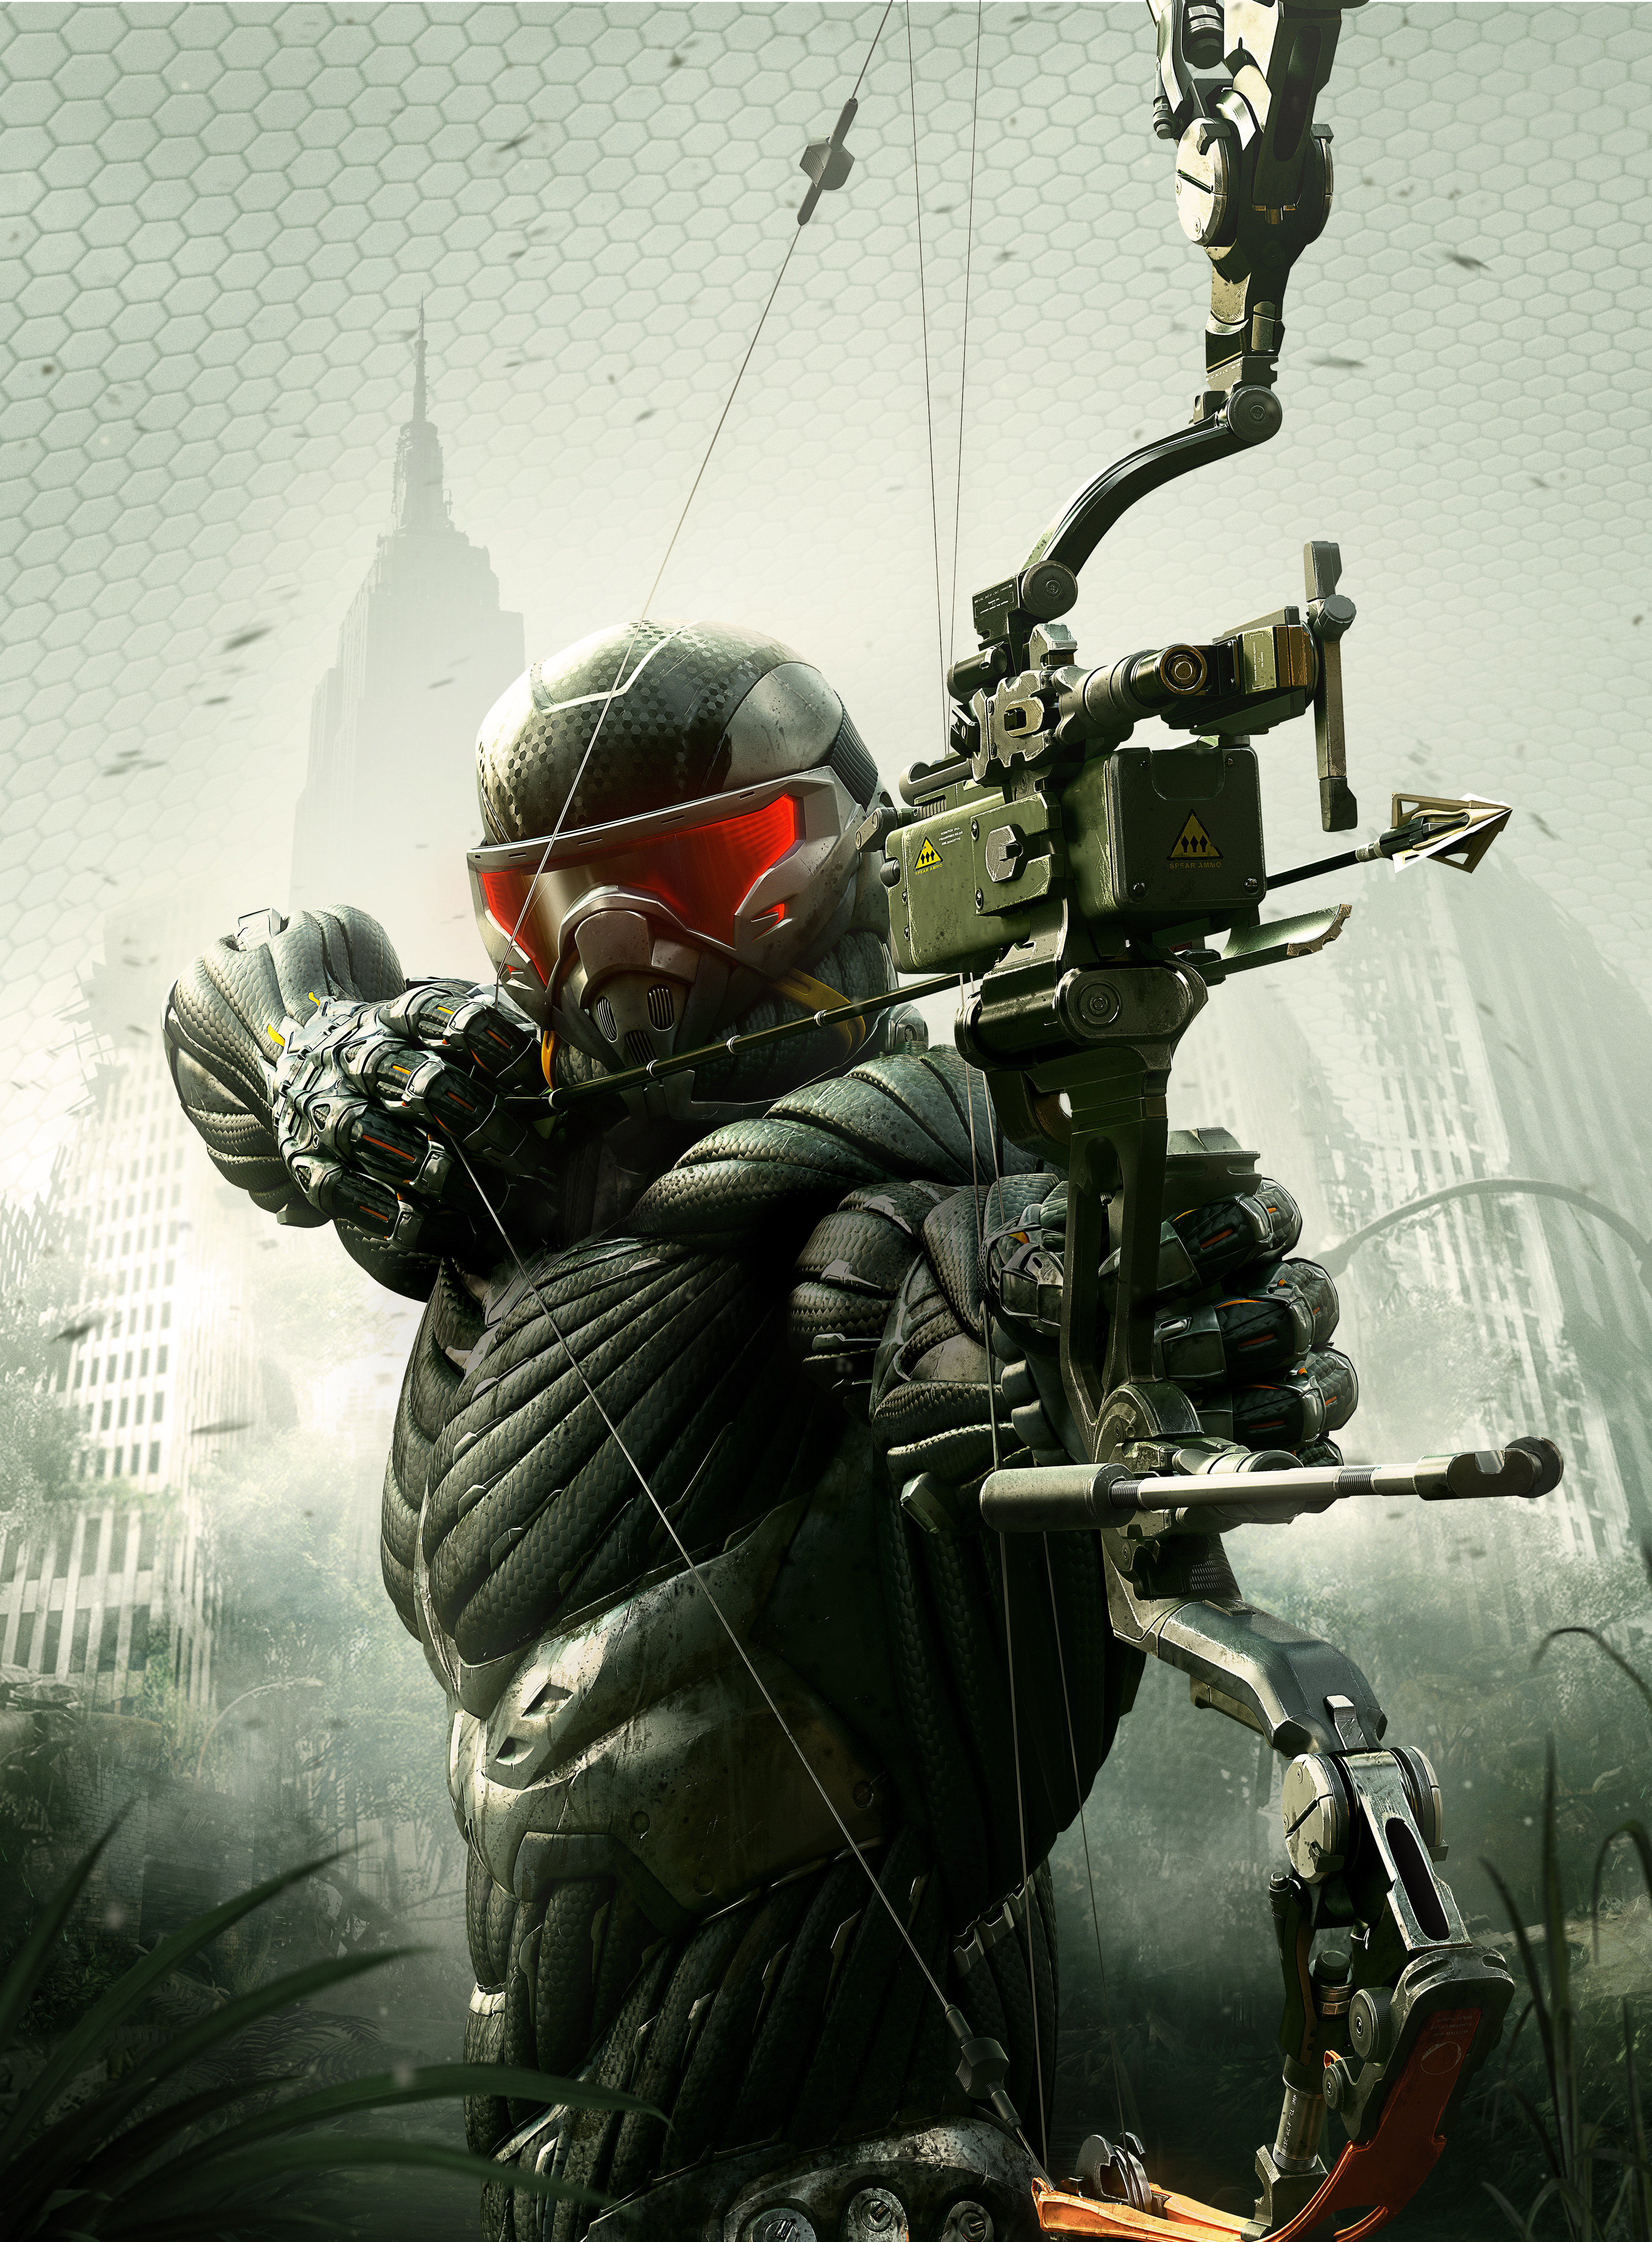 crysis 3 xbox one download